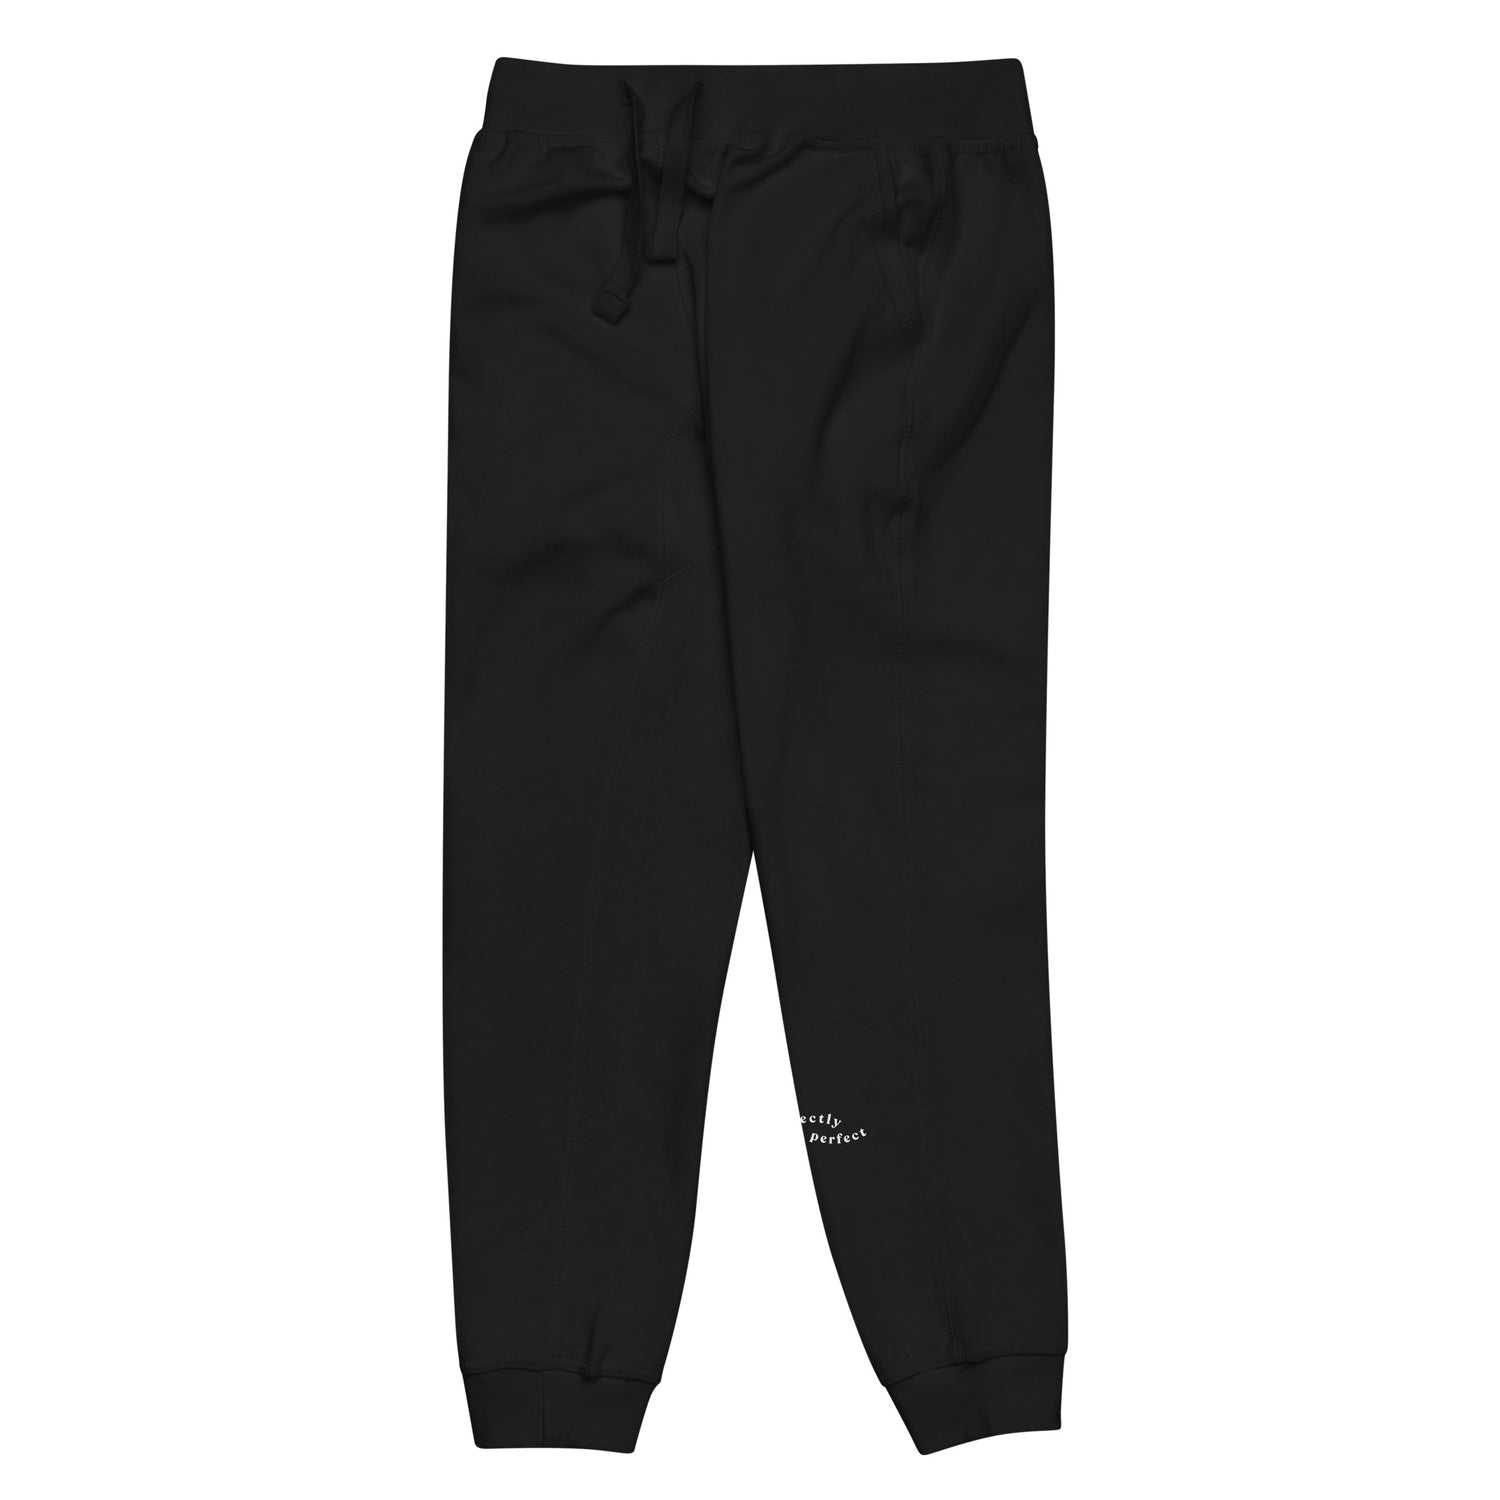 Side of full length Black sweat pant with pockets on side, featuring "Imperfectly perfect" printed on left side lower leg.